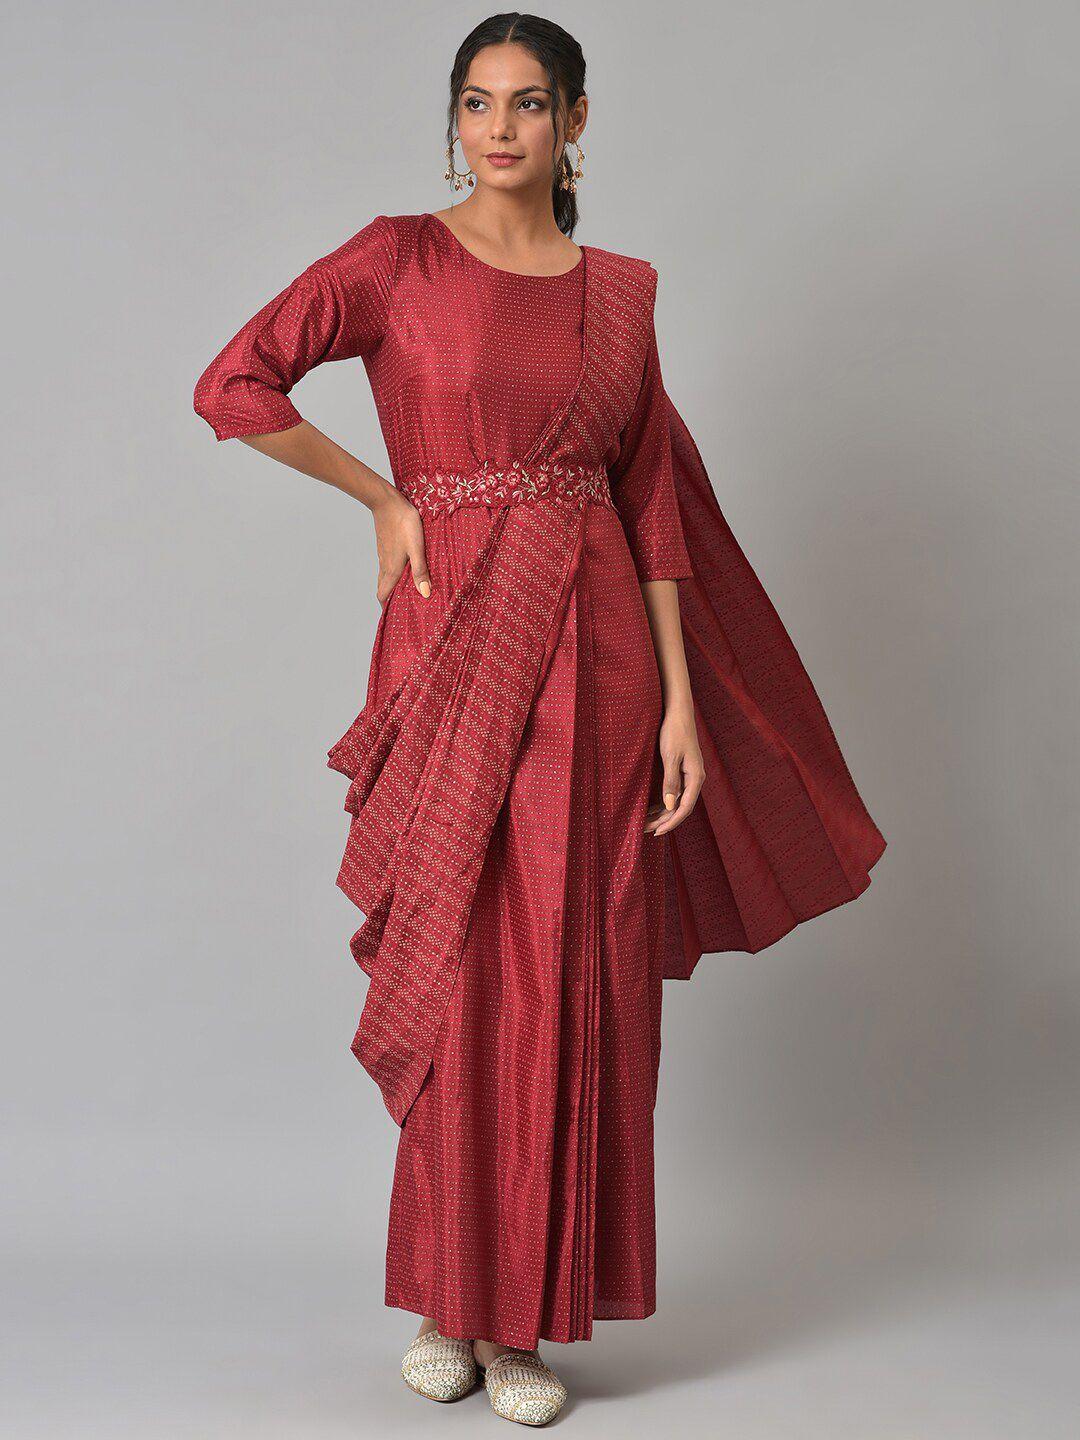 w-red-satin-maroon-maxi-insta-saree-dress-with-embroidered-belt